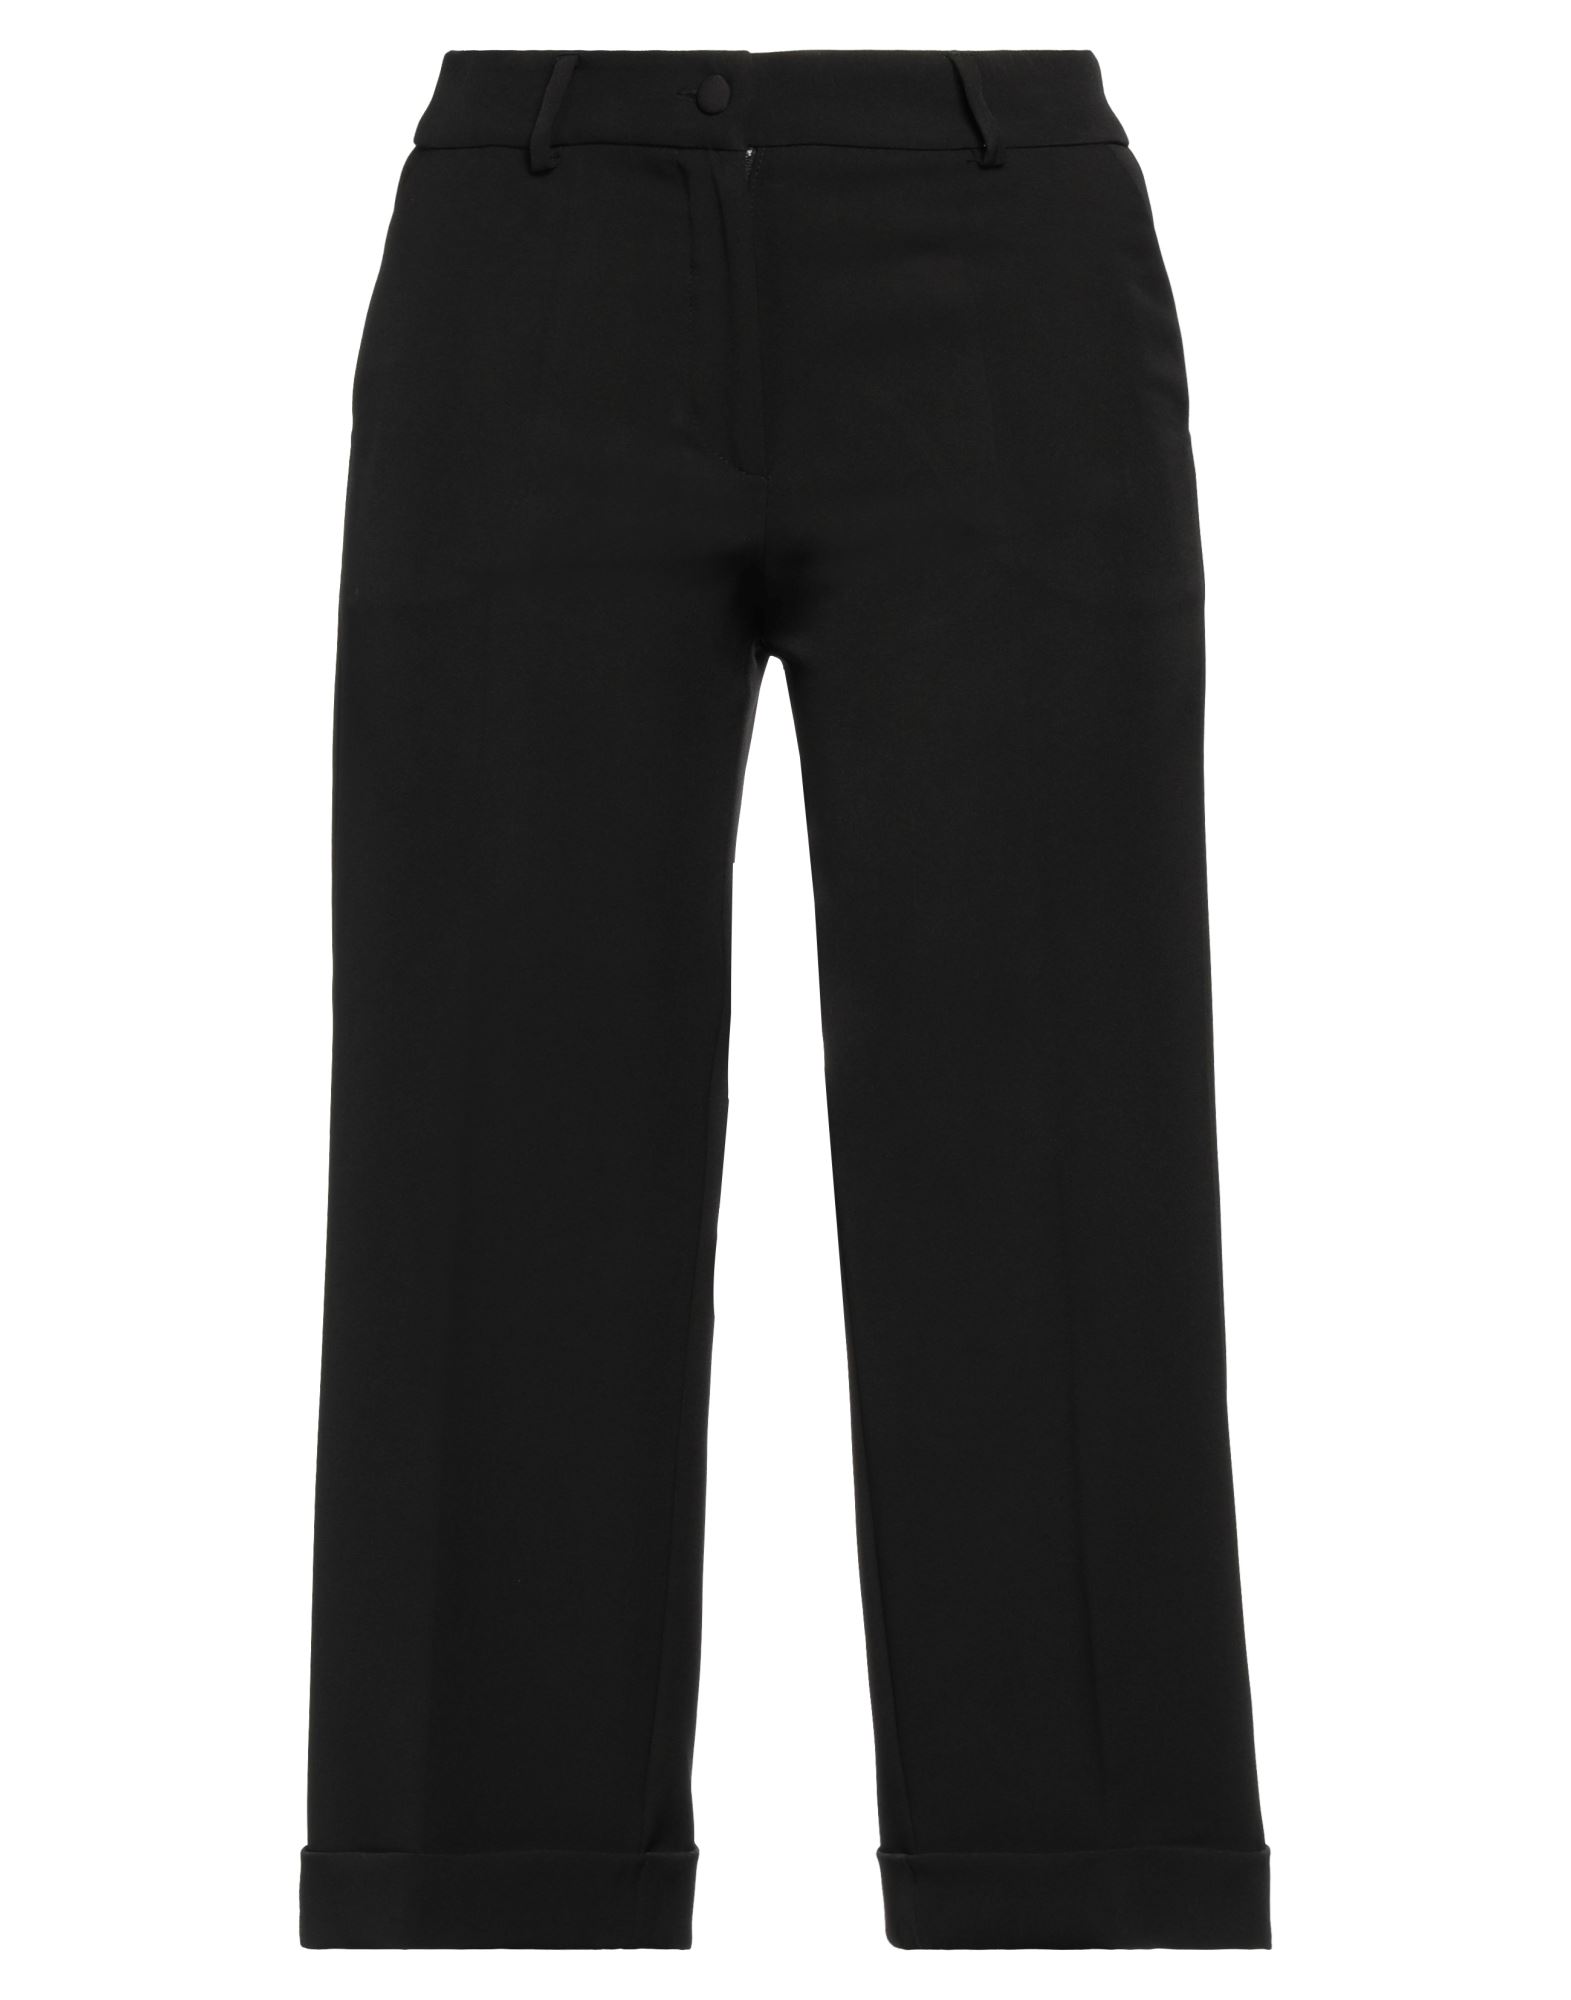 Access Fashion Cropped Pants In Black